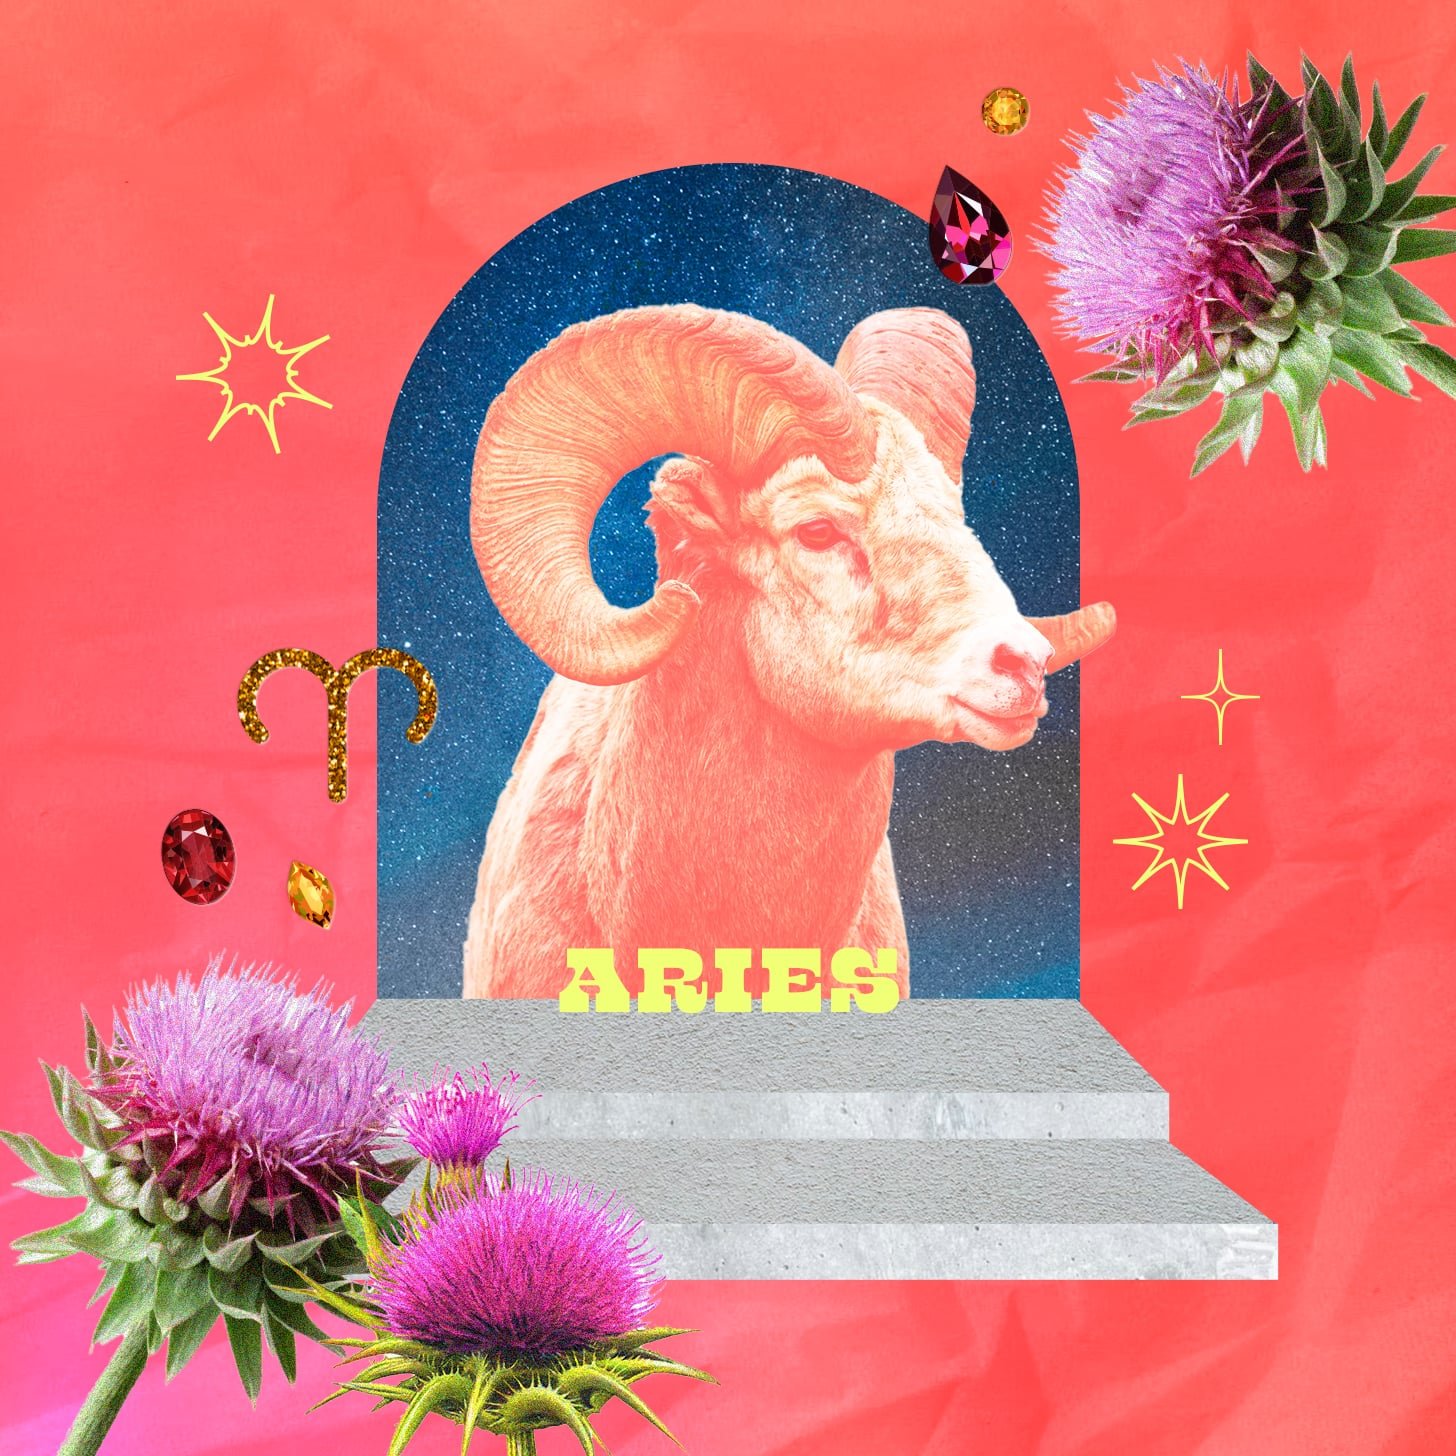 Aries weekly horoscope for December 4, 2022